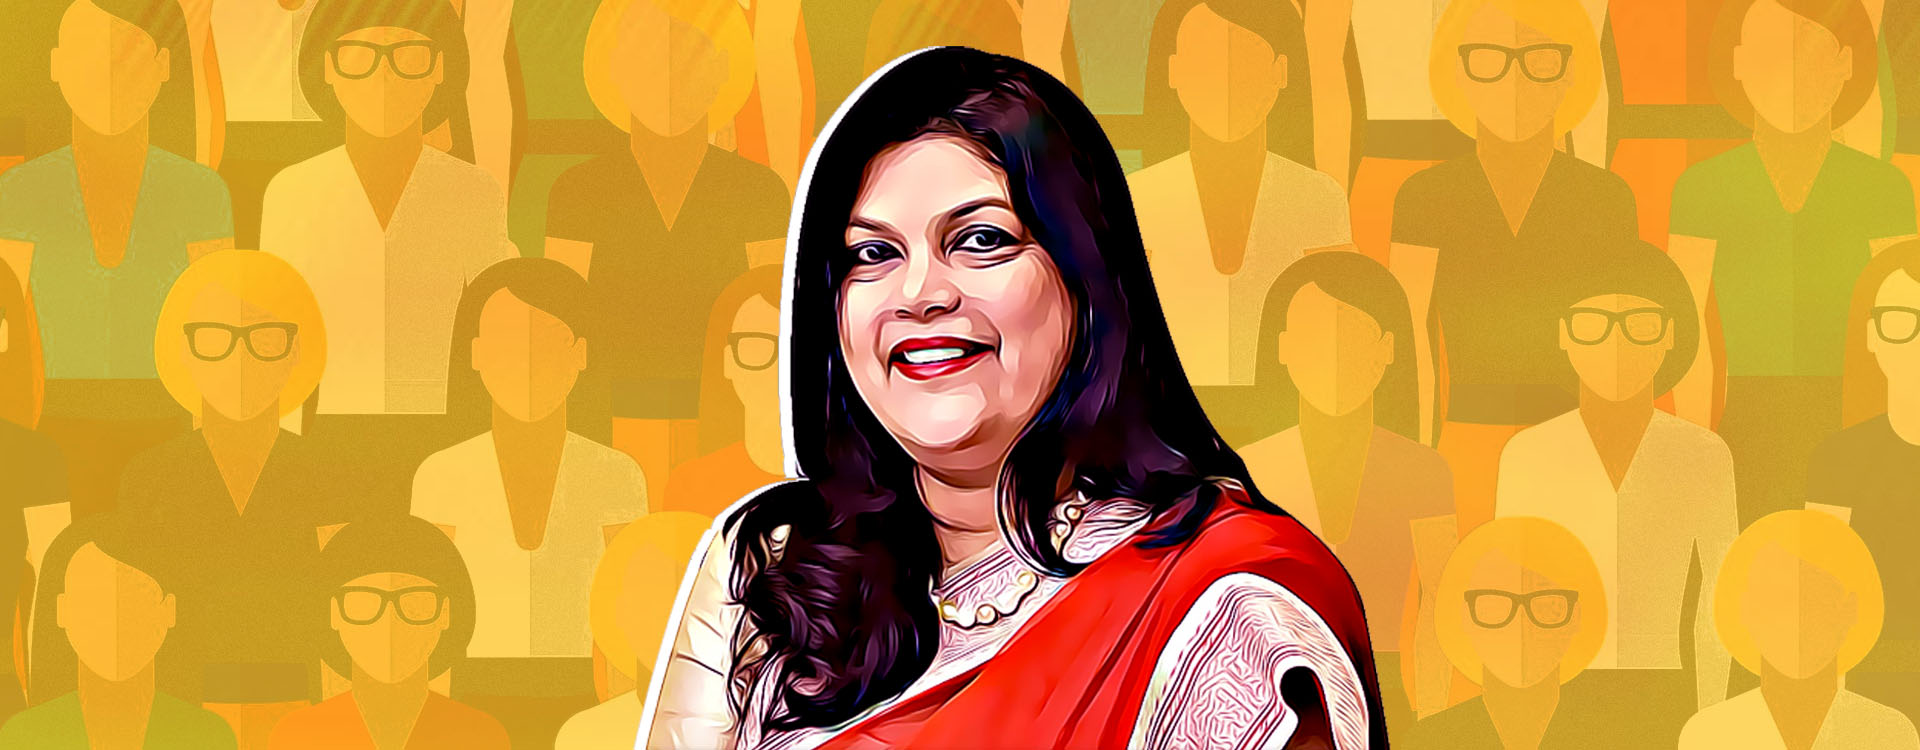 Nykaa's Founder, Falguni Nayar: Standing for women who want to look beautiful for themselves